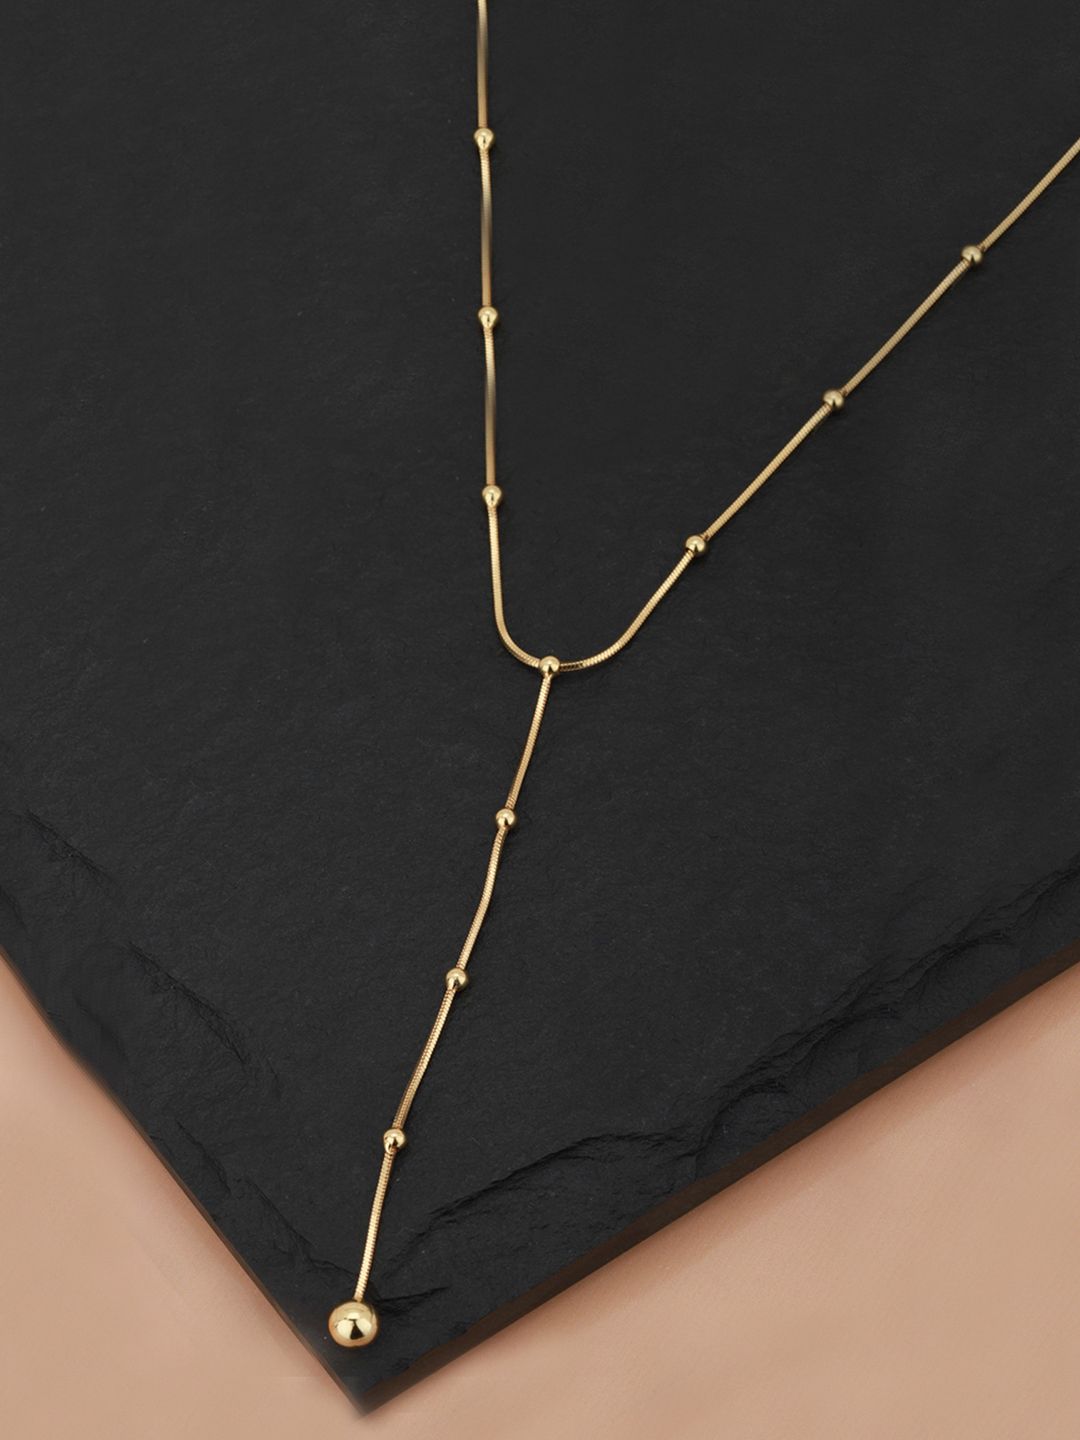 Carlton London Gold-Plated Lariat Necklace Price in India